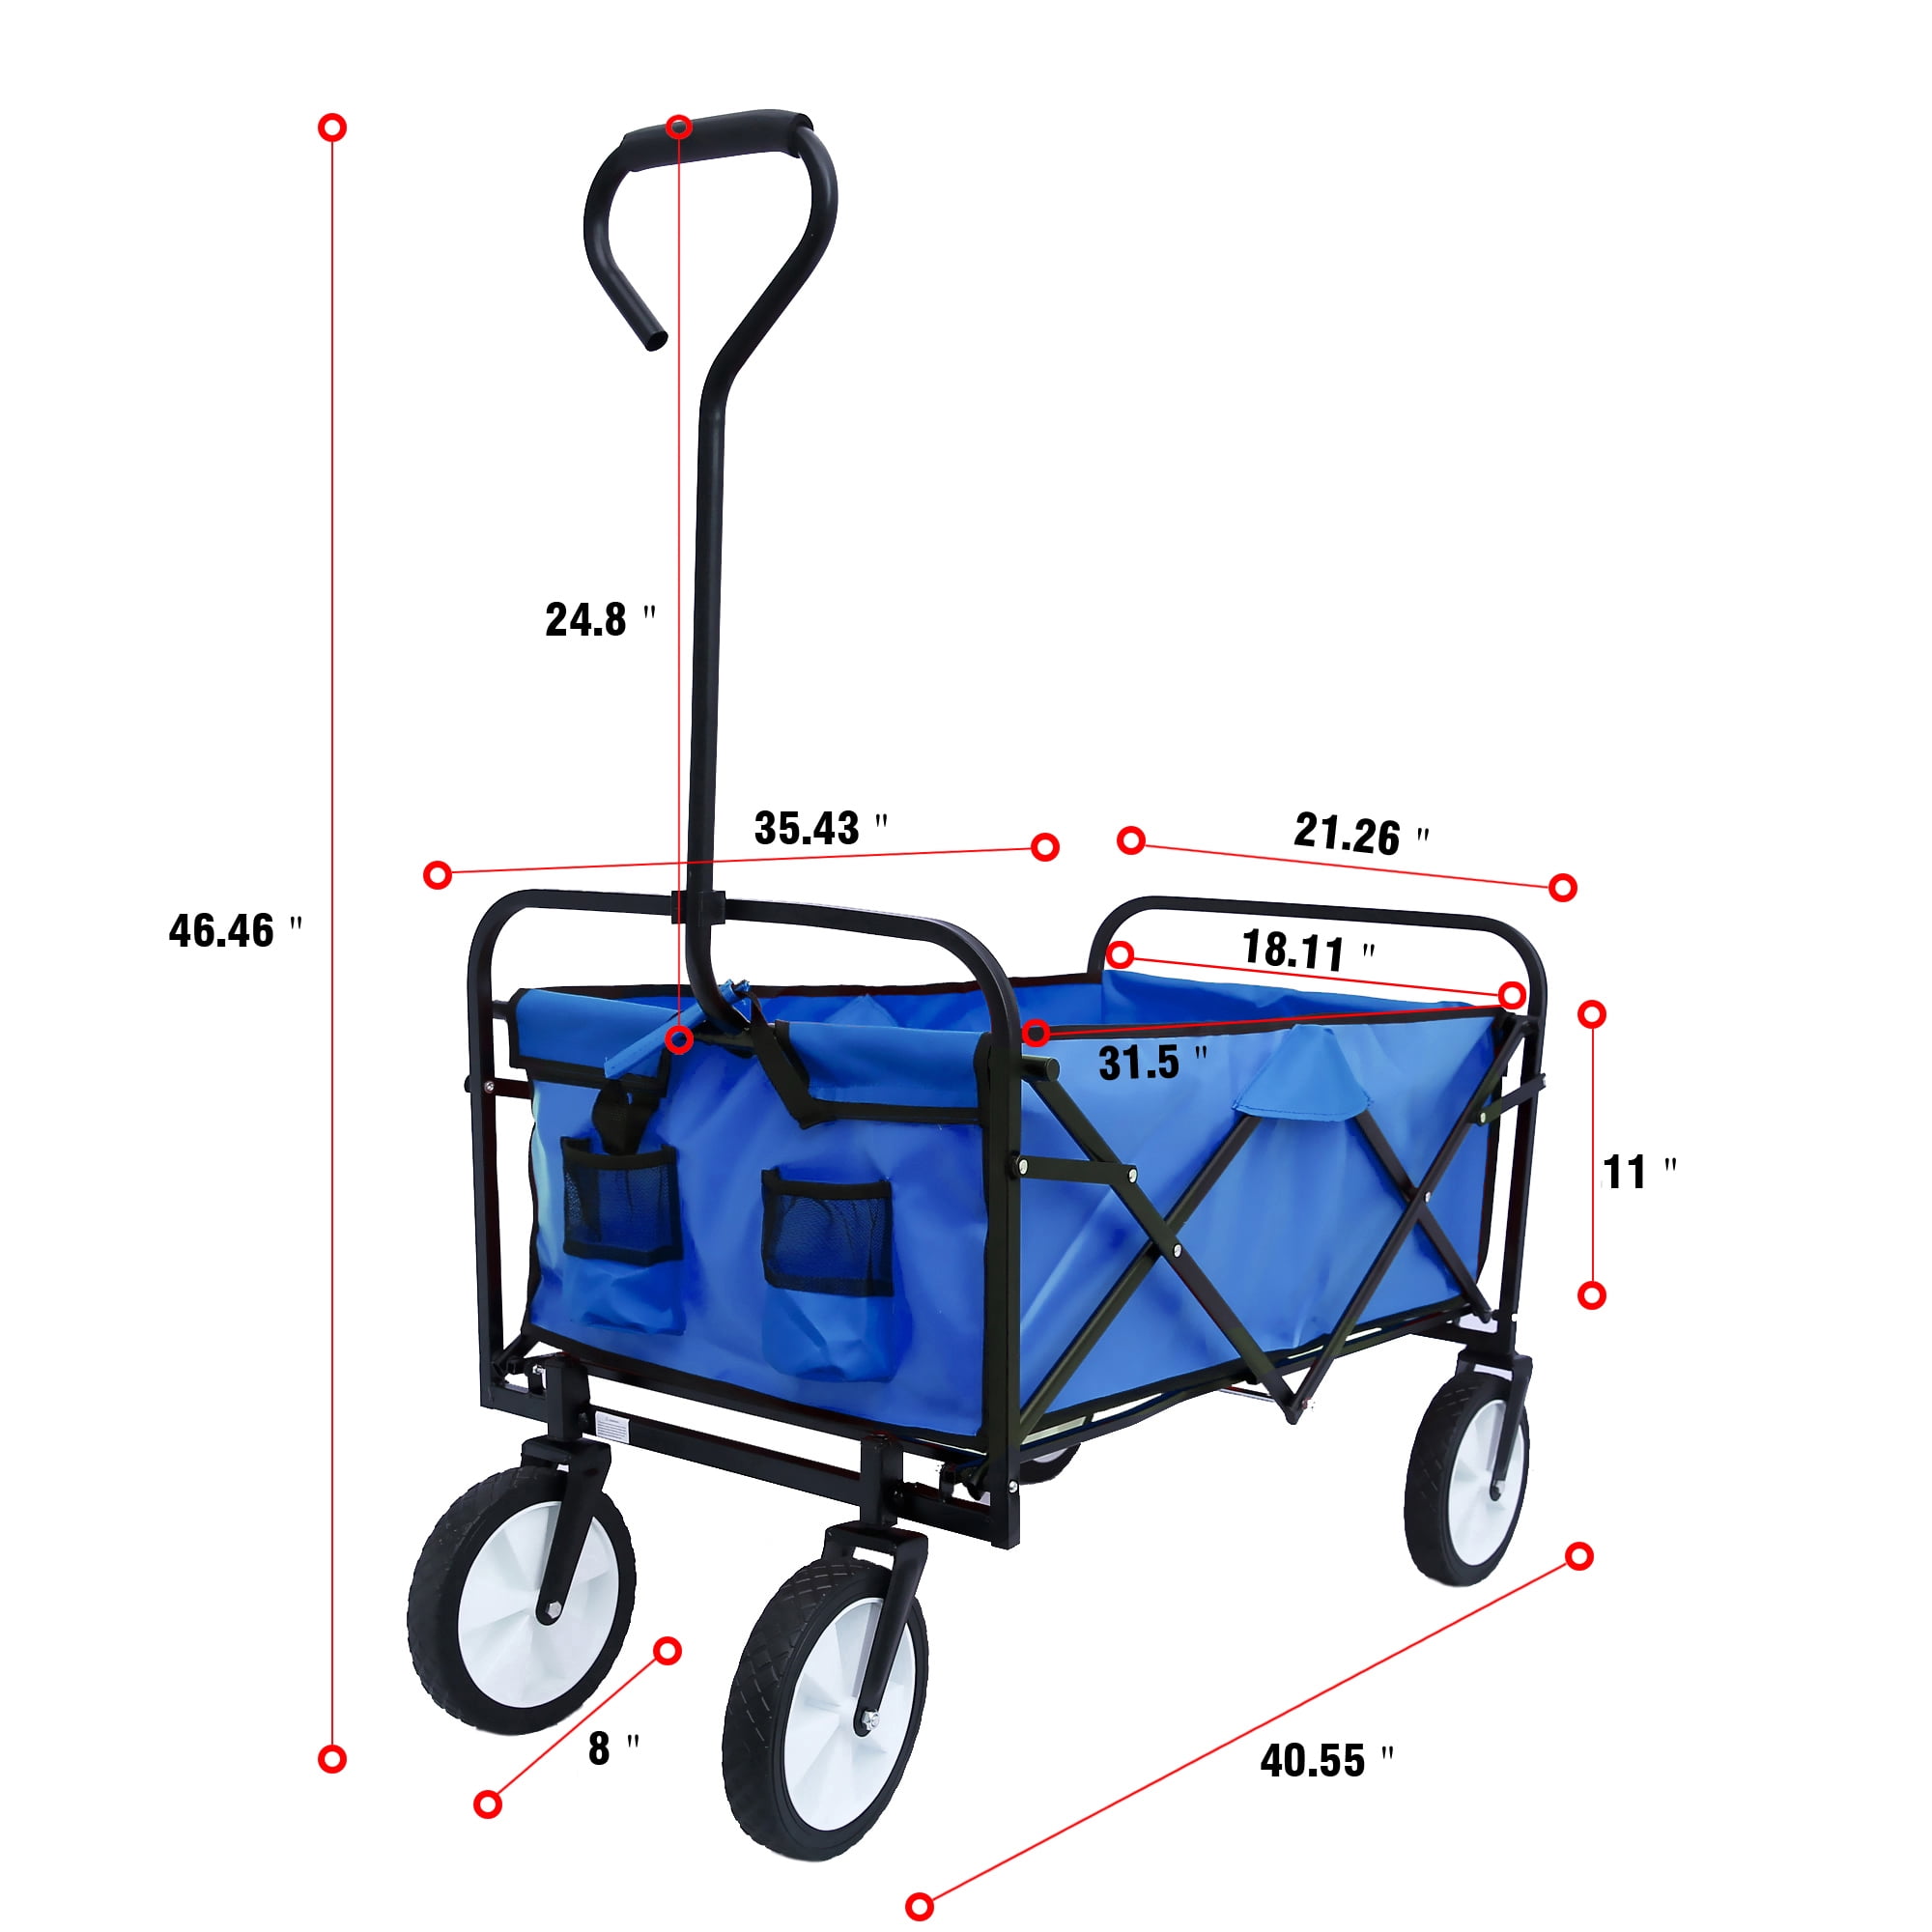 DNYKER Heavy Duty Folding Wagon Cart with Drink Holders Garden Cart for Picnic Universal Wheels Camping Shopping Beach Wagon Blue Adjustable Handle 